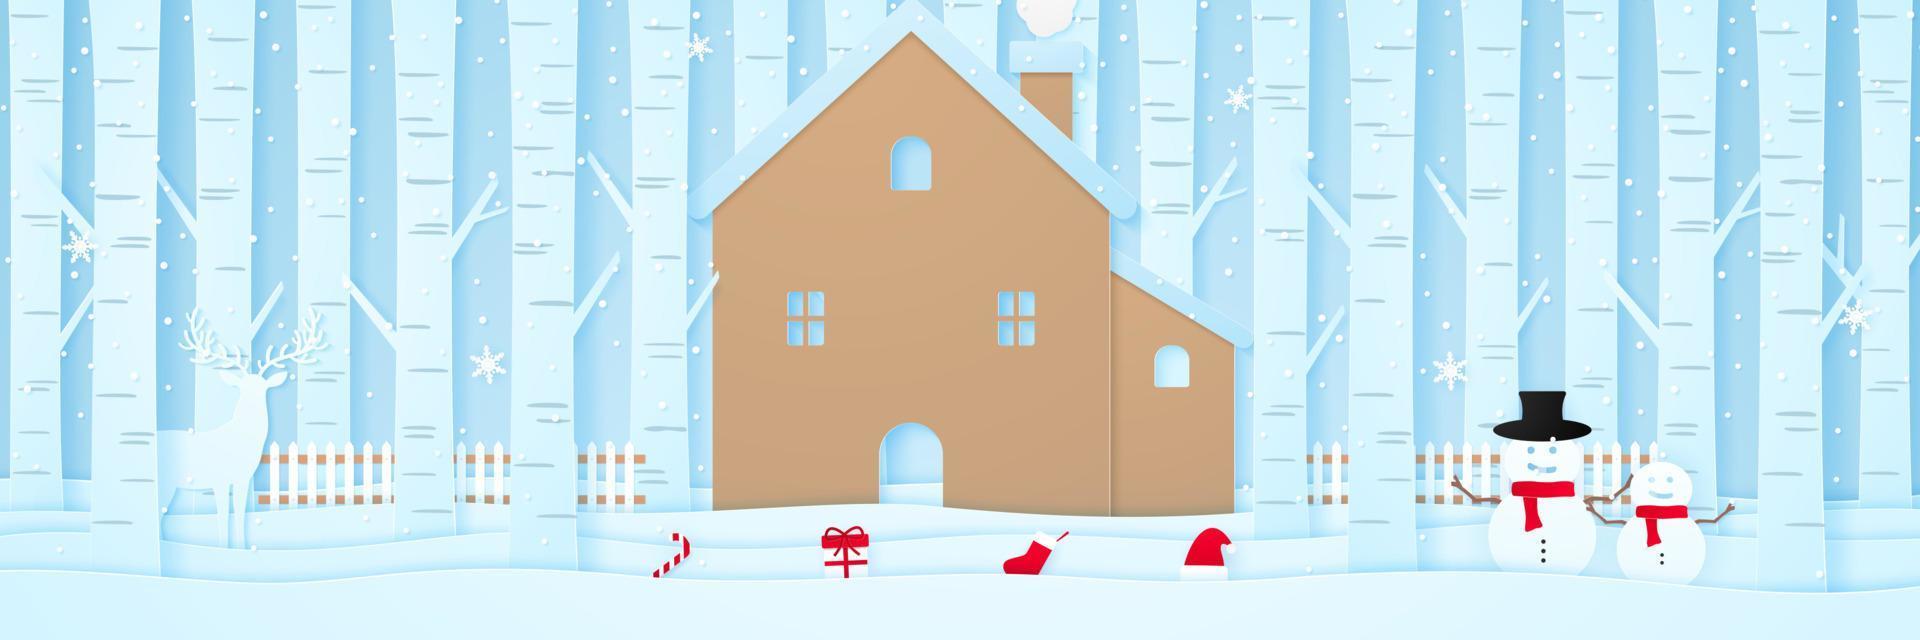 Merry Christmas, house with reindeer, snowman, Christmas stuff, fence and pine trees on snow in winter landscape with snow falling, paper art style vector